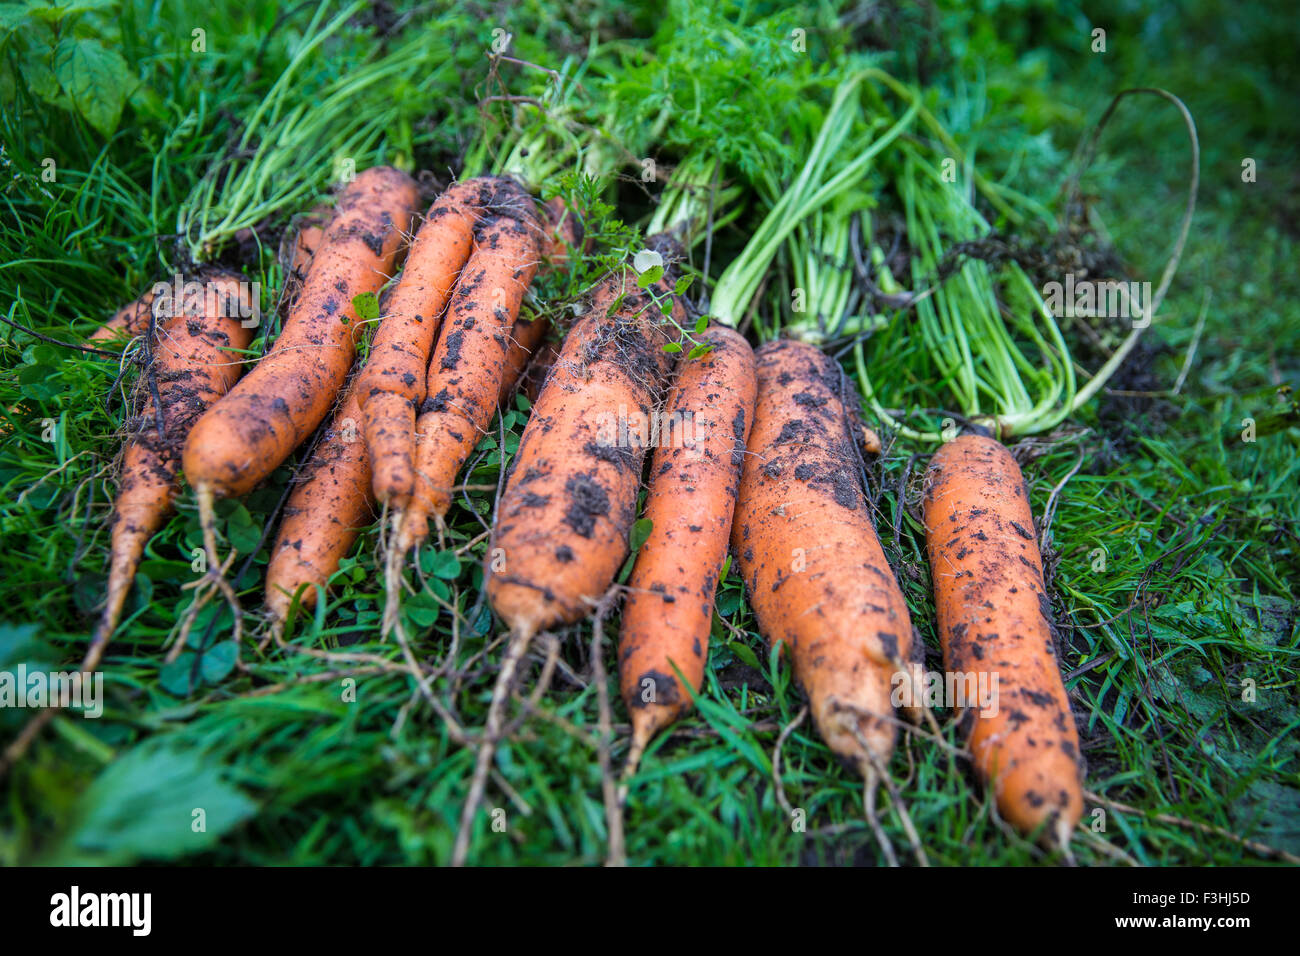 Fresh harvested carrots with soil on the ground Stock Photo